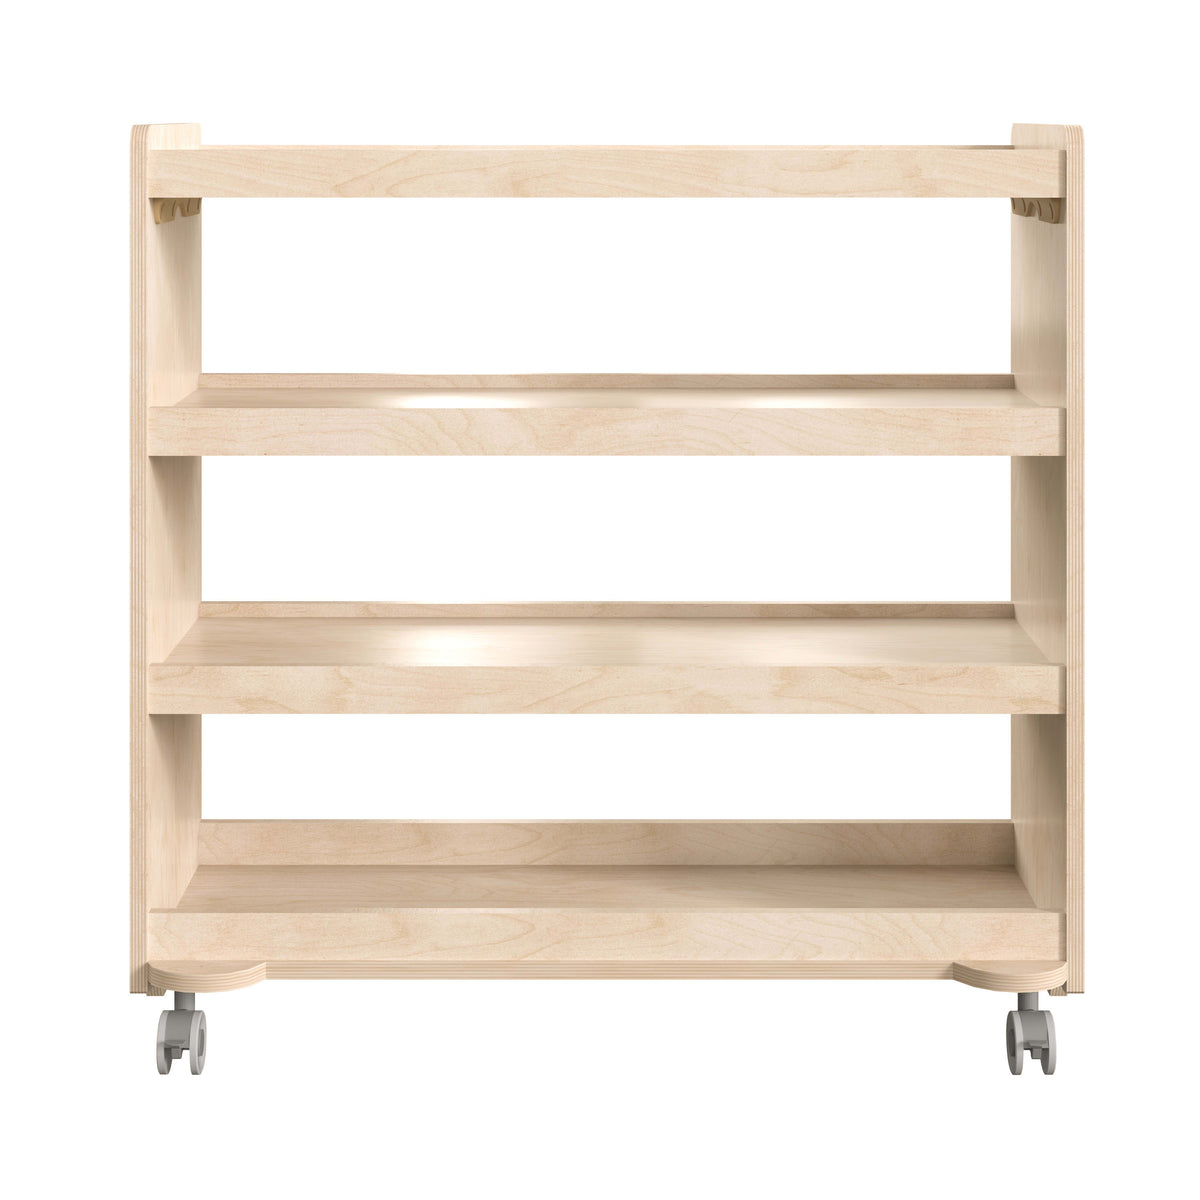 Commercial Grade Natural Finish Wooden Classroom 4 Shelf Mobile Storage Cart